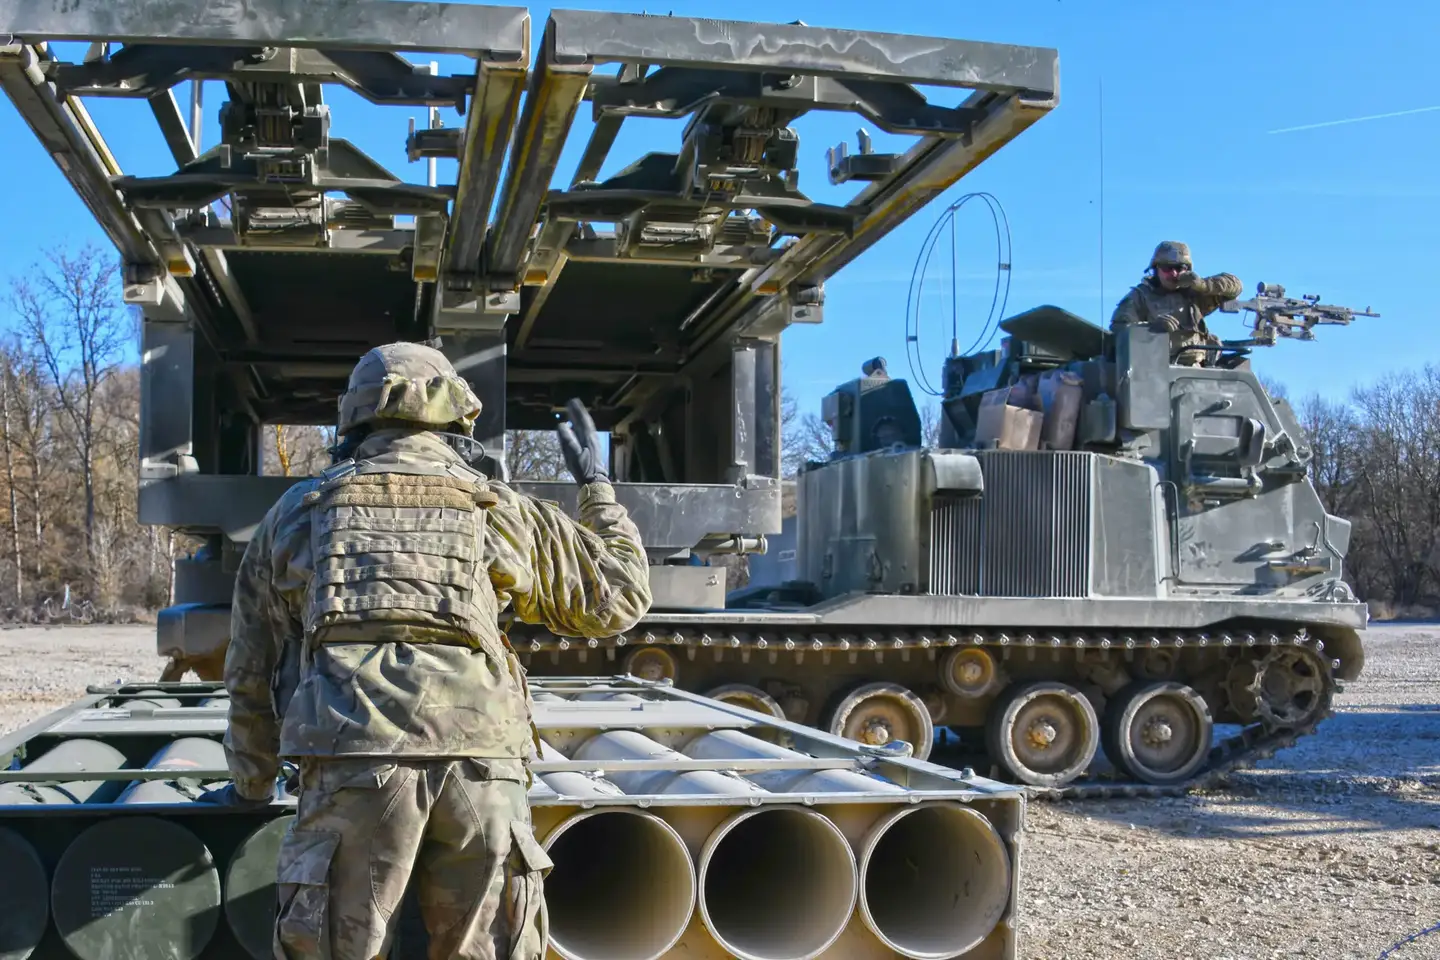 U.S. Soldiers load an M270 Multiple Launch Rocket System at Grafenwoehr Training Area, Germany, in March.&nbsp;<em>U.S. Army photo by Gertrud Zach</em>